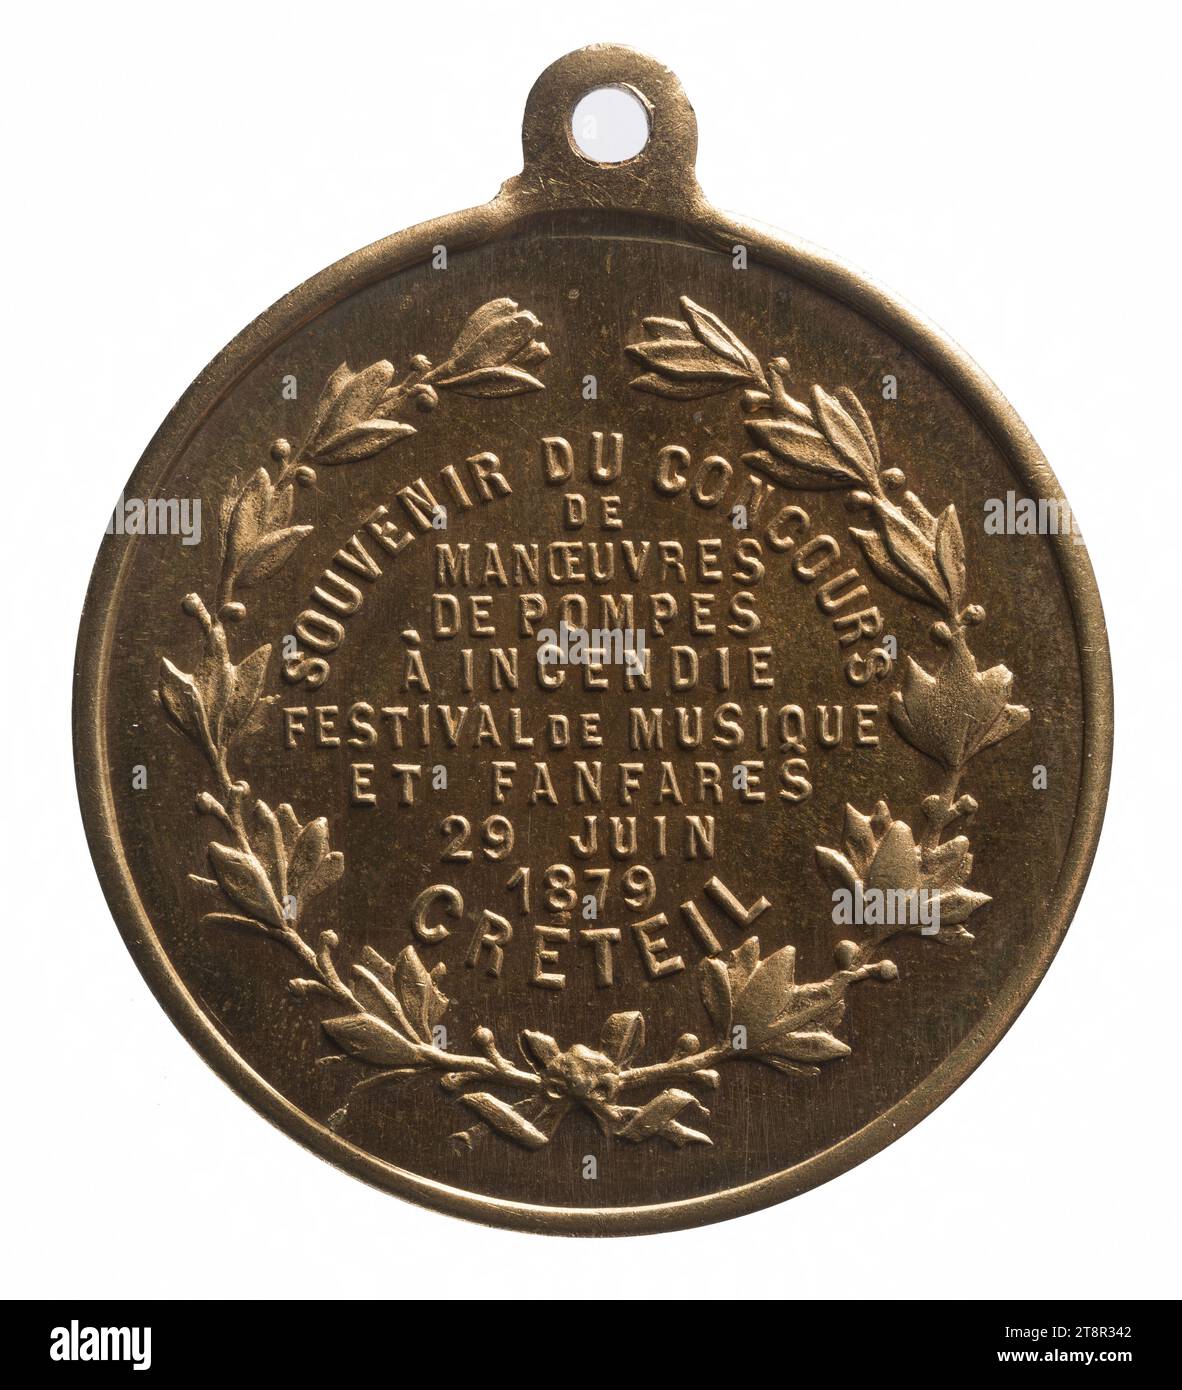 Competition of maneuvers of fire pumps in Creteil, June 29, 1879, In 1879, Numismatic, Medal, Copper, Gilt = gilding, Dimensions - Work: Diameter: 3.3 cm, Weight (type dimension): 8.94 g Stock Photo